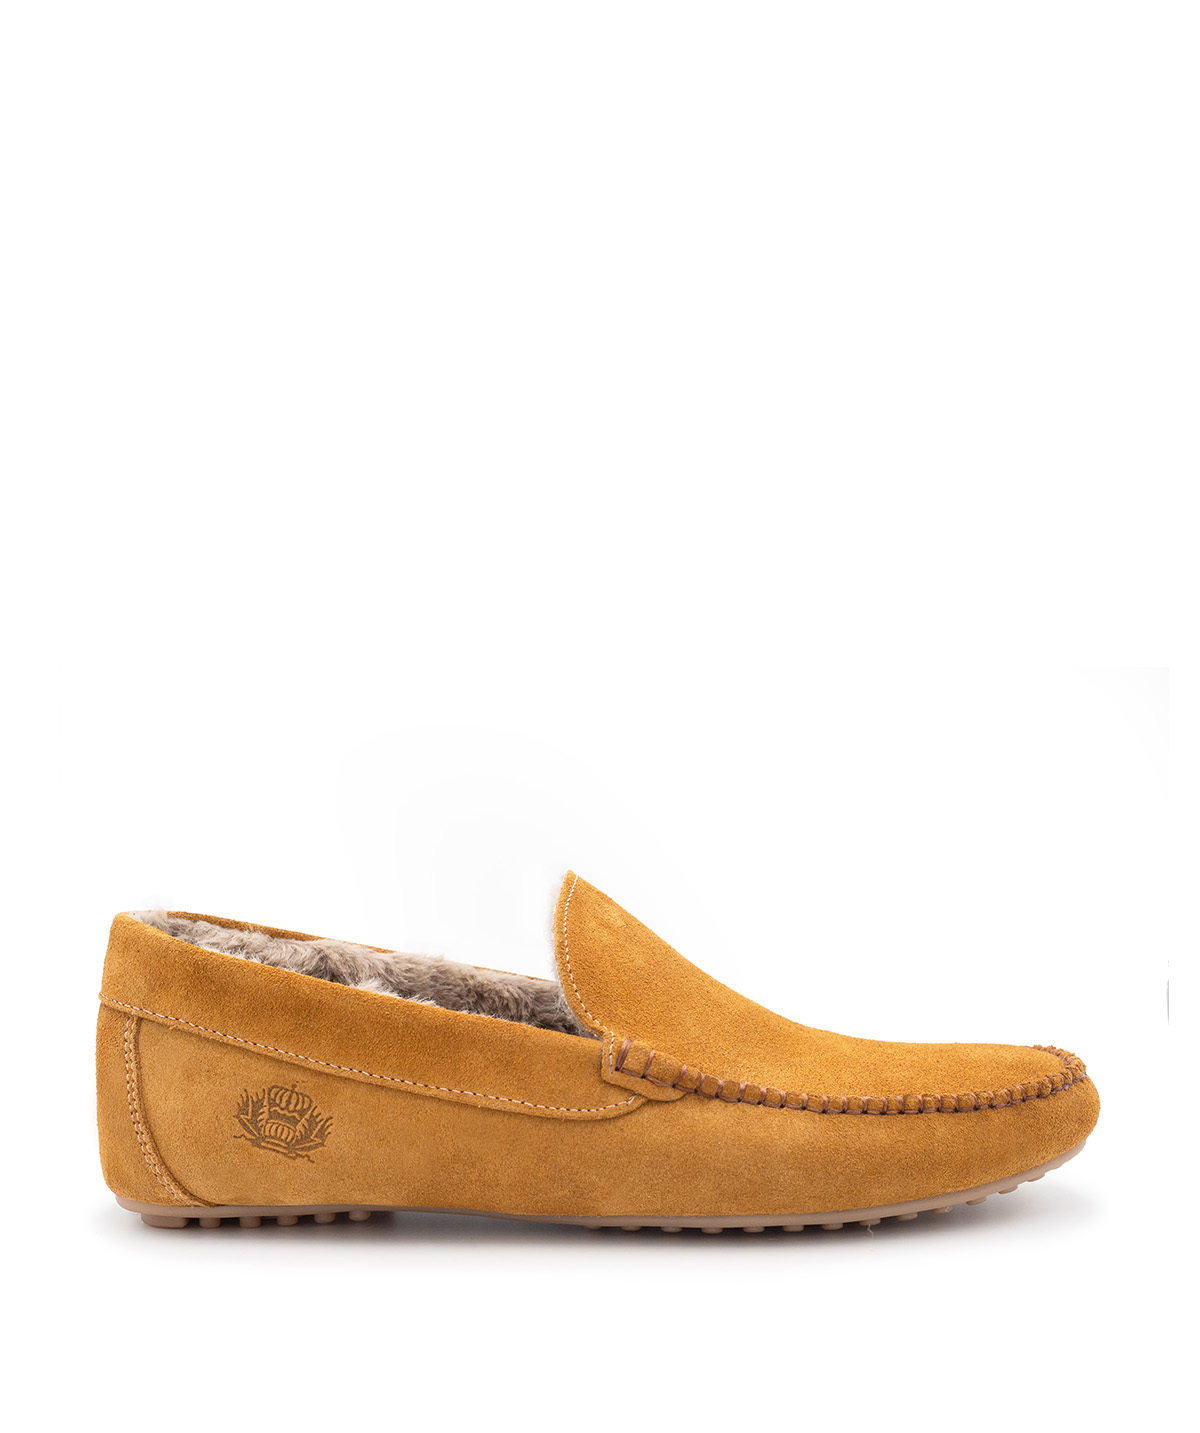 Loafers Lined Homs Light Brown Suede